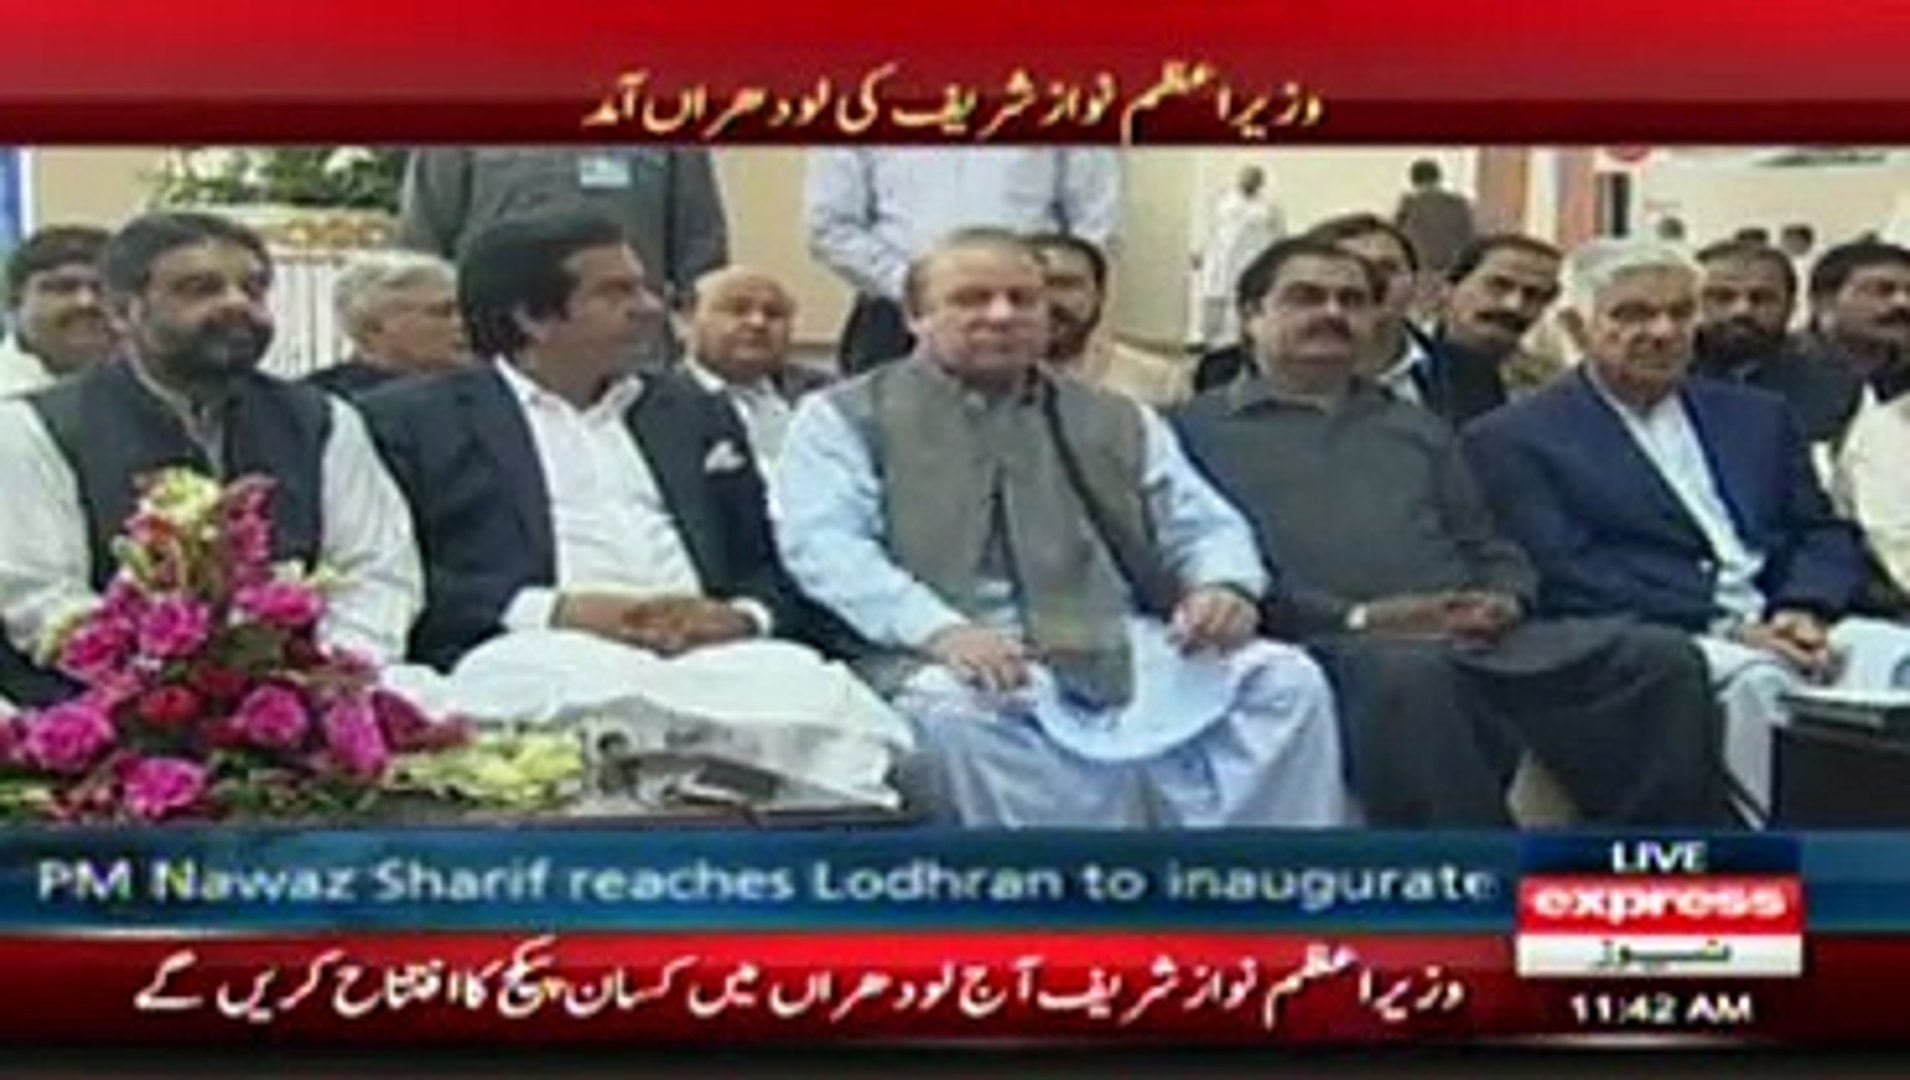 express news latest naews about Prime Minister latest visit lodhran